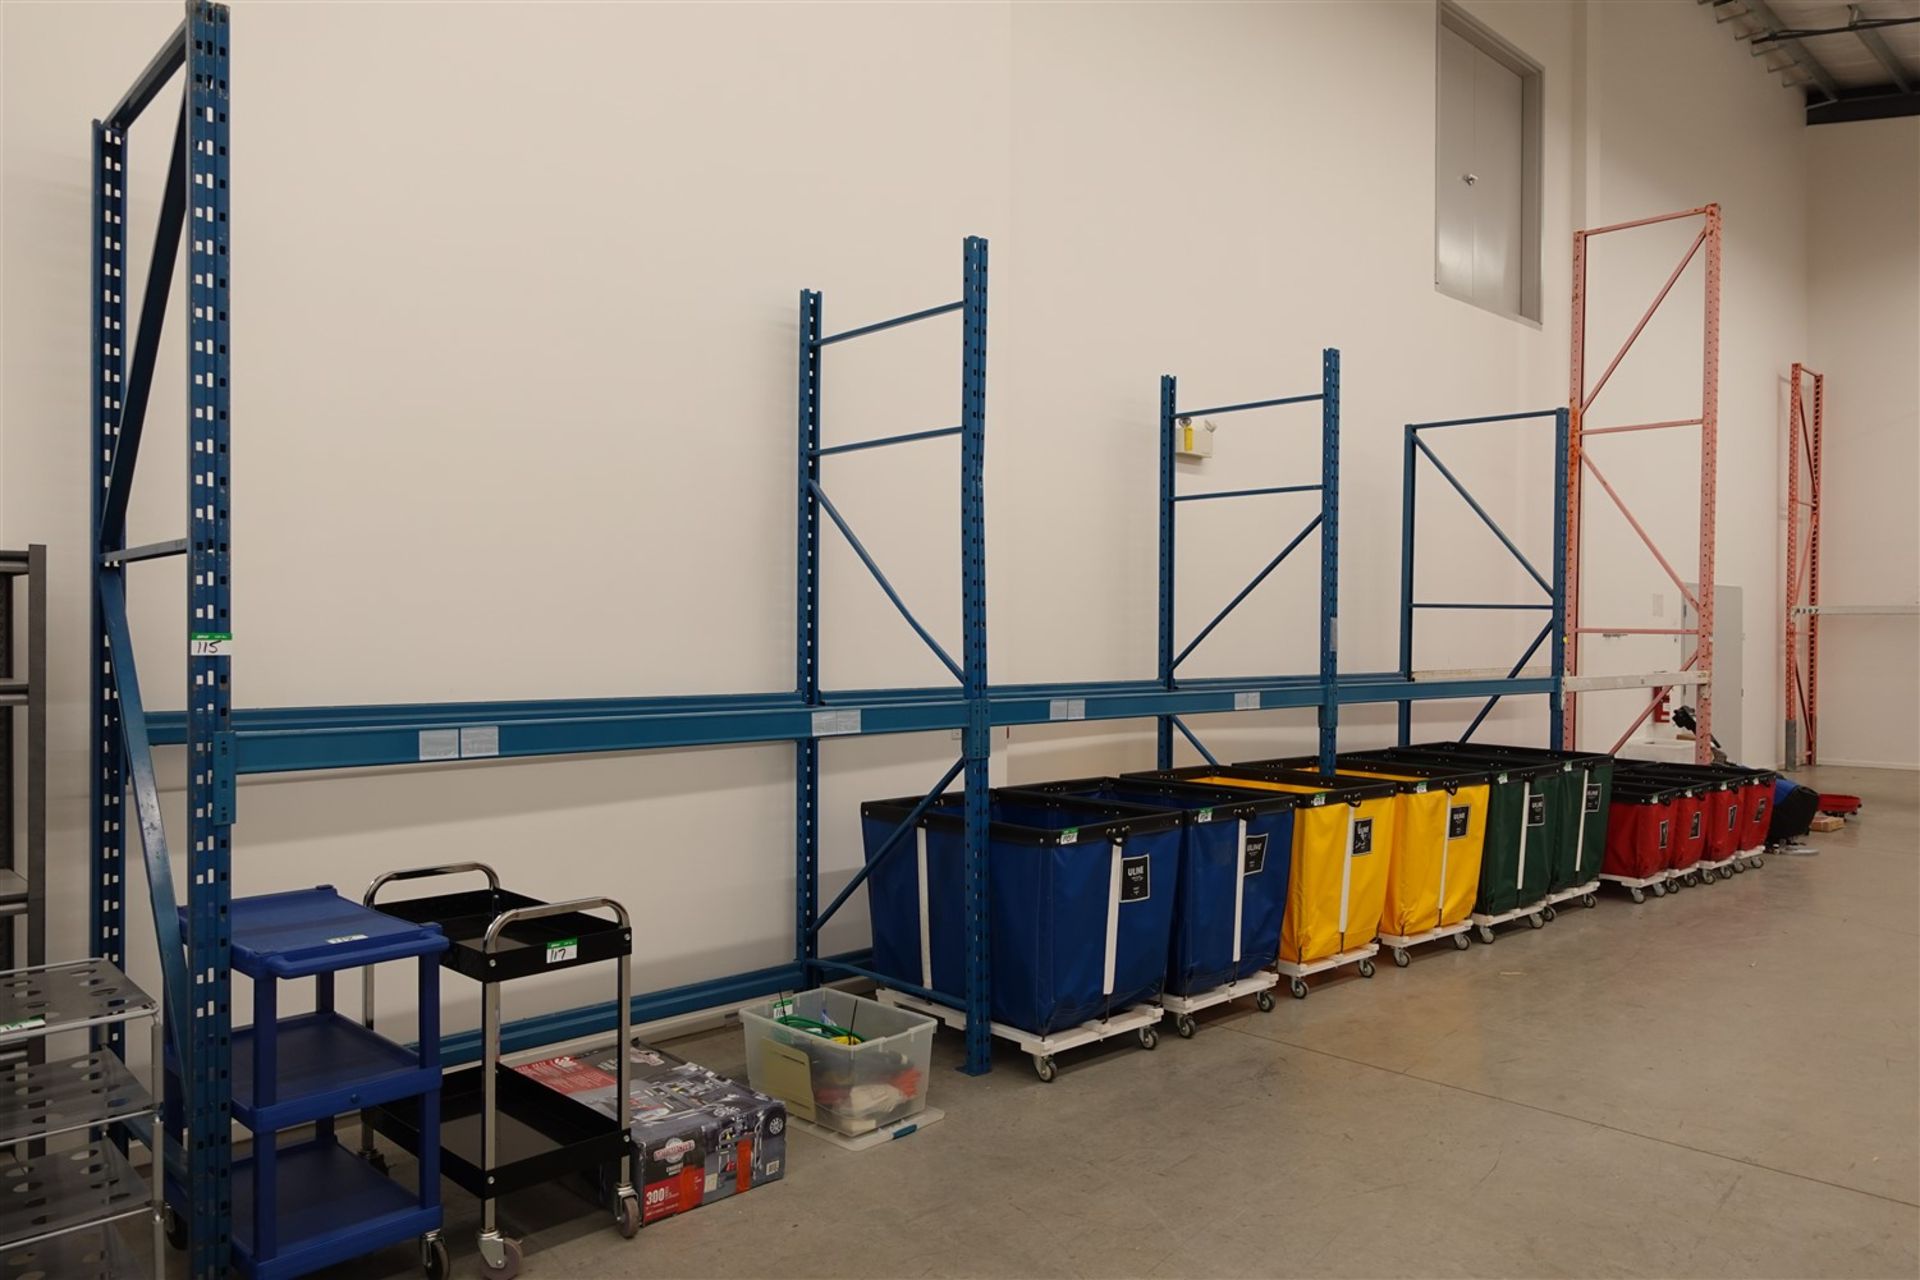 4 SECTIONS OF PALLET RACKING